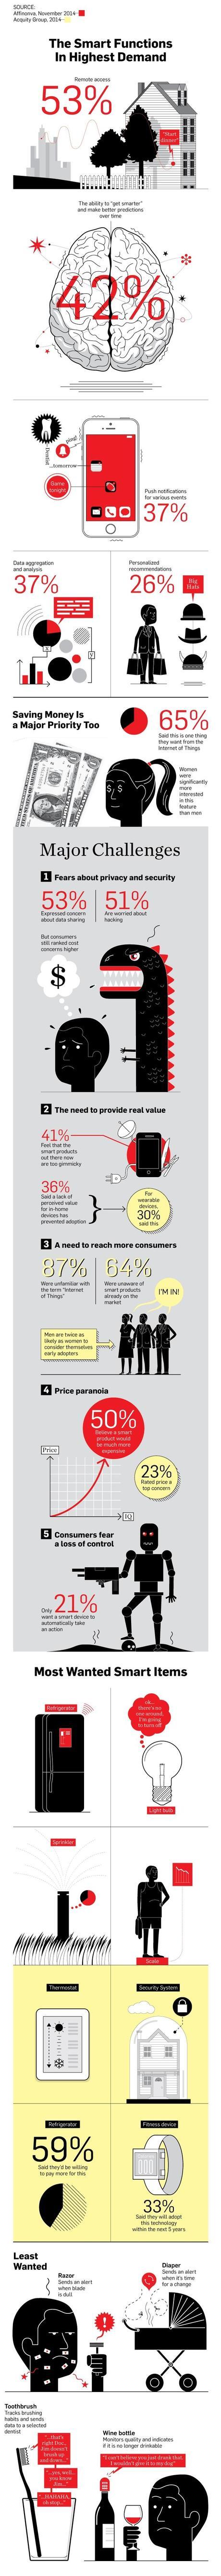 Consumer Views on the Internet of Things Infographic